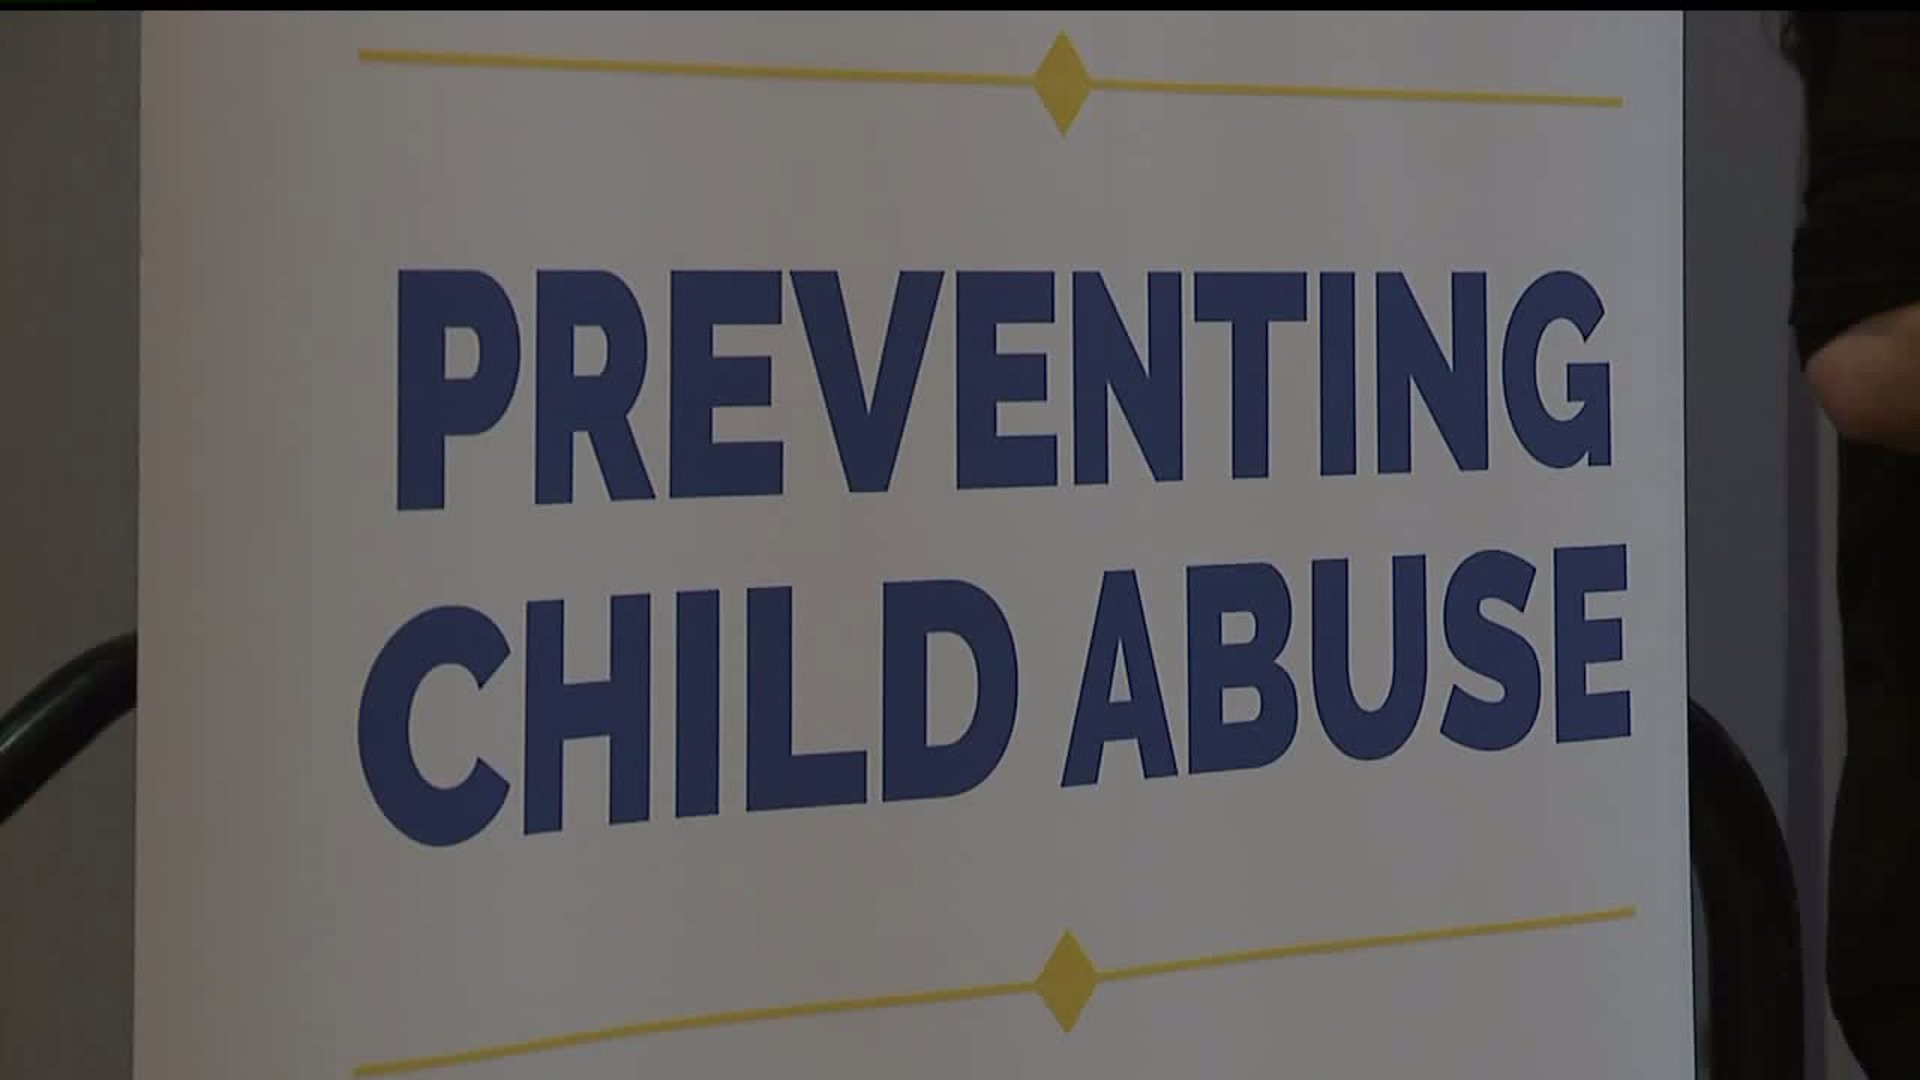 Child abuse prevention symposium held in downtown Harrisburg